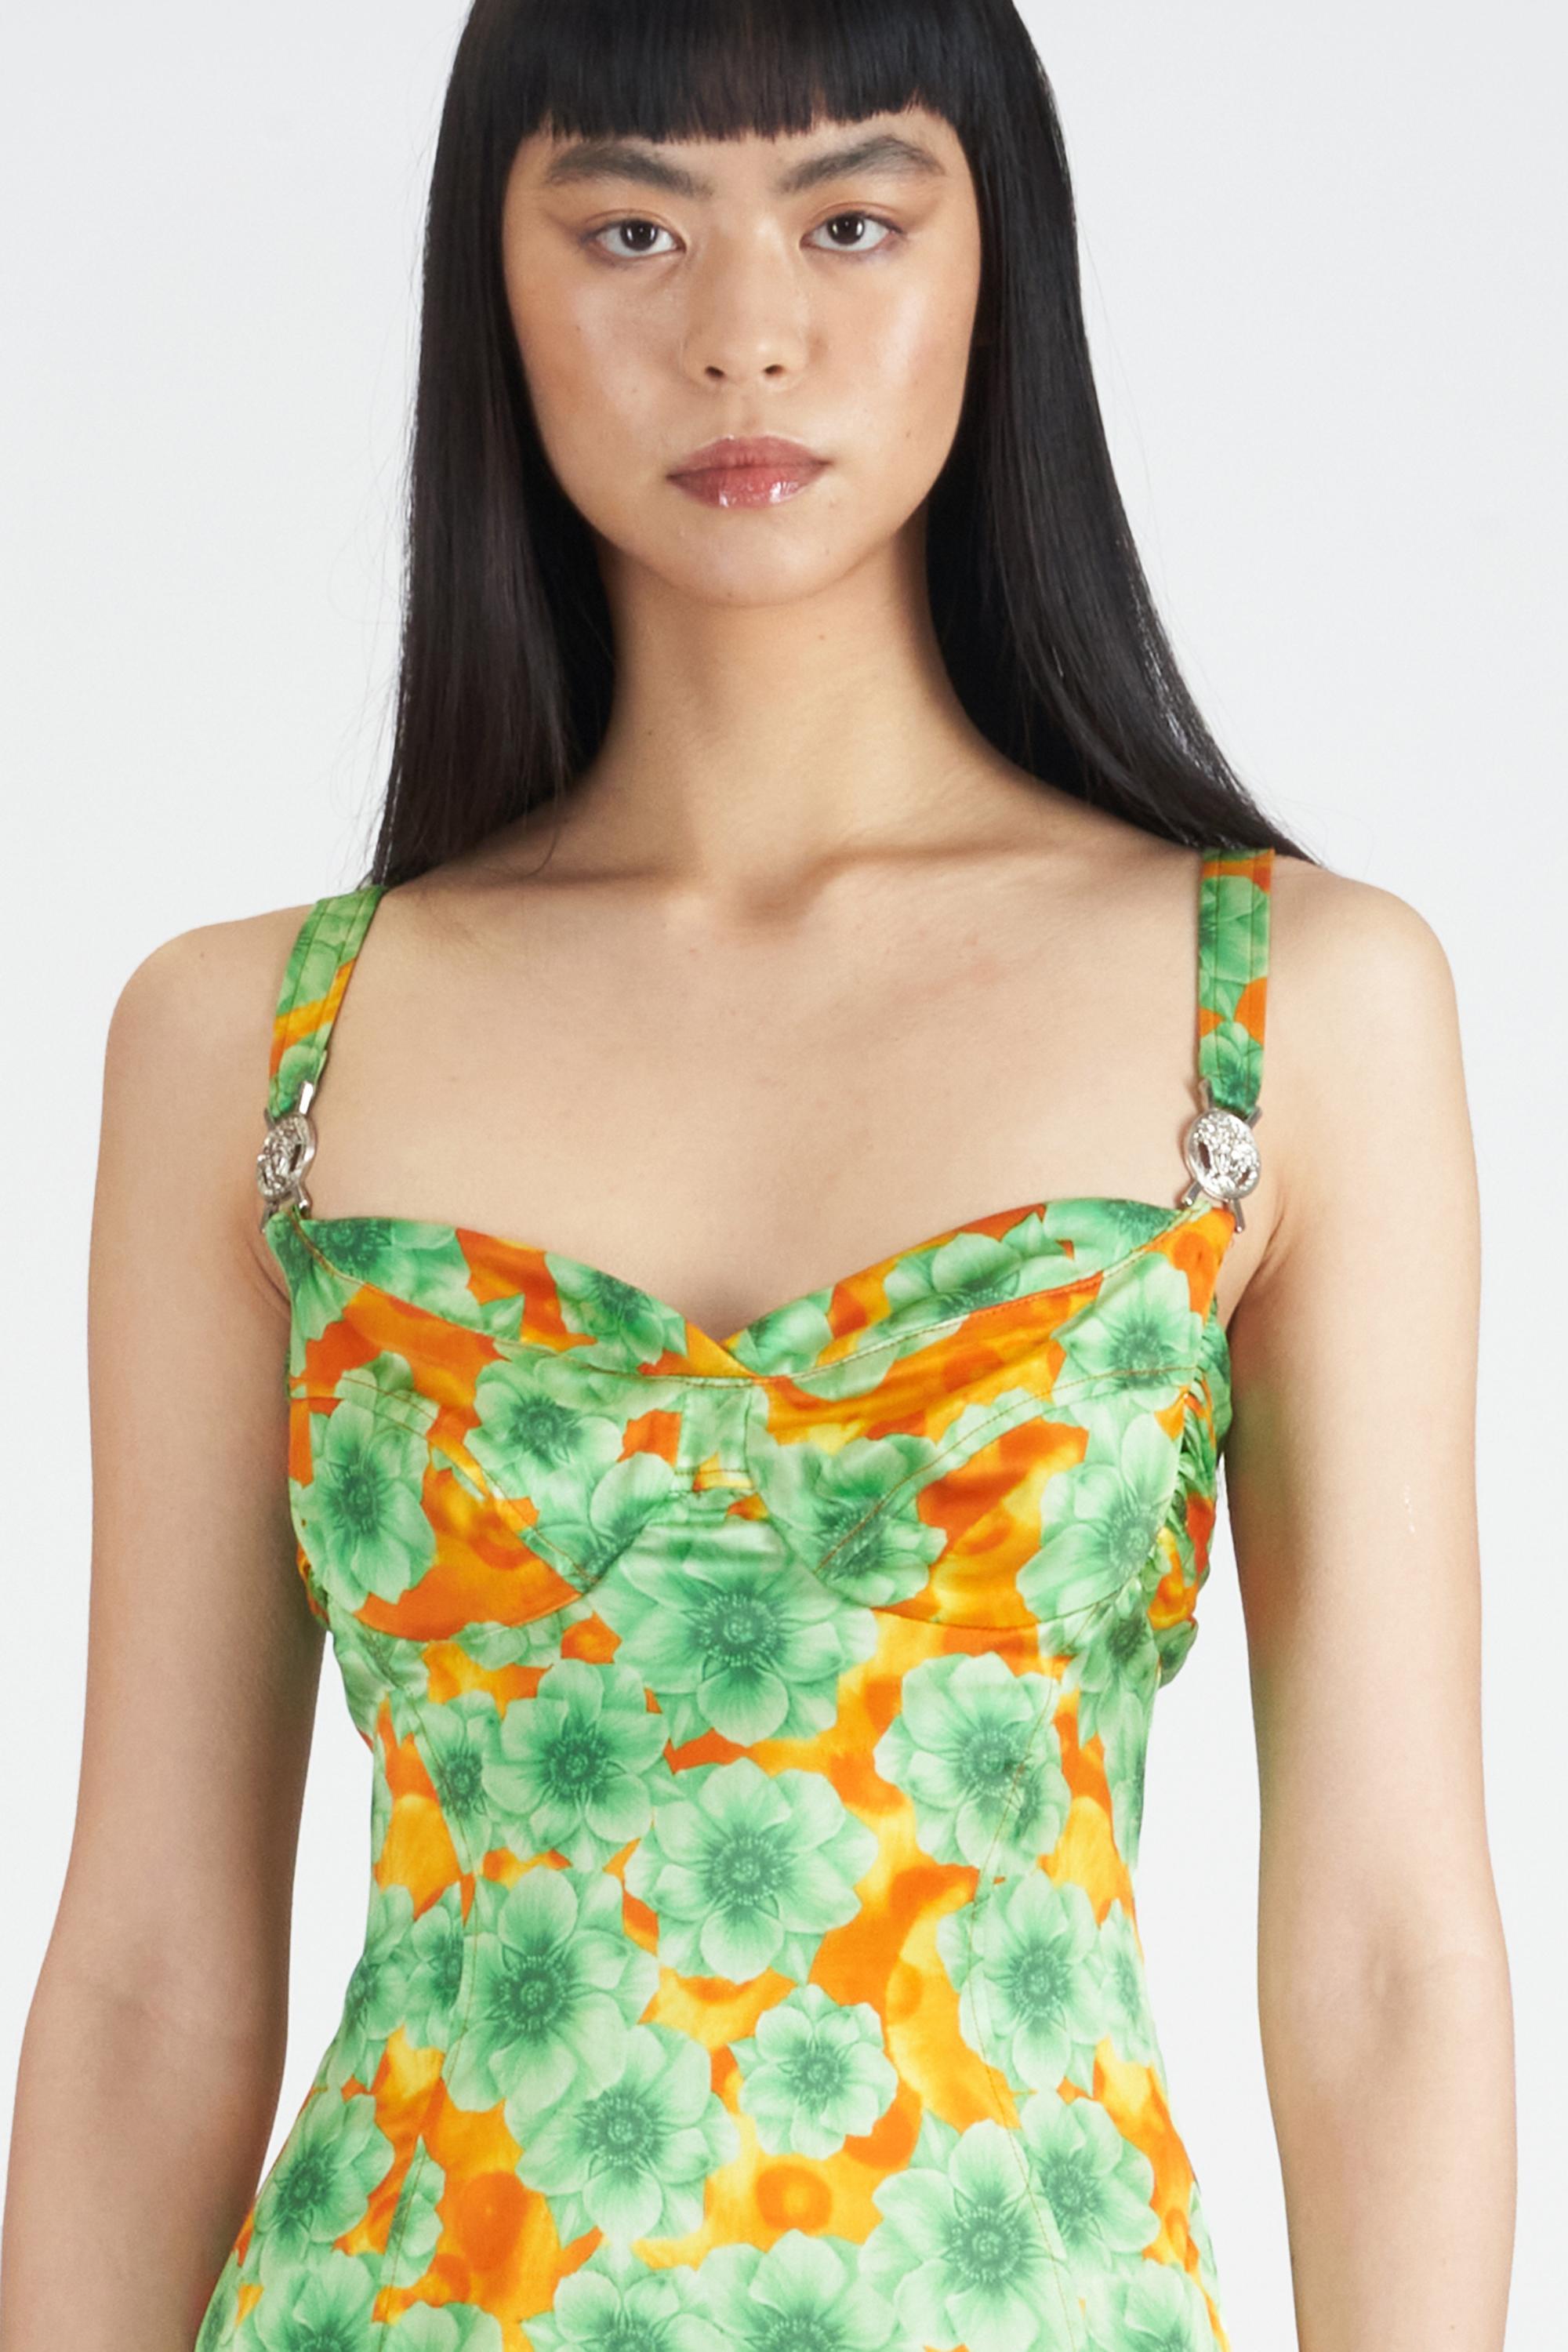 We are excited to present Versace Spring Summer 1990s floral green and orange dress. Features Versace medusa medallion on strap, ruched detail, back zip closure and mini length. In excellent vintage condition.
Authenticity guaranteed.

Label size: